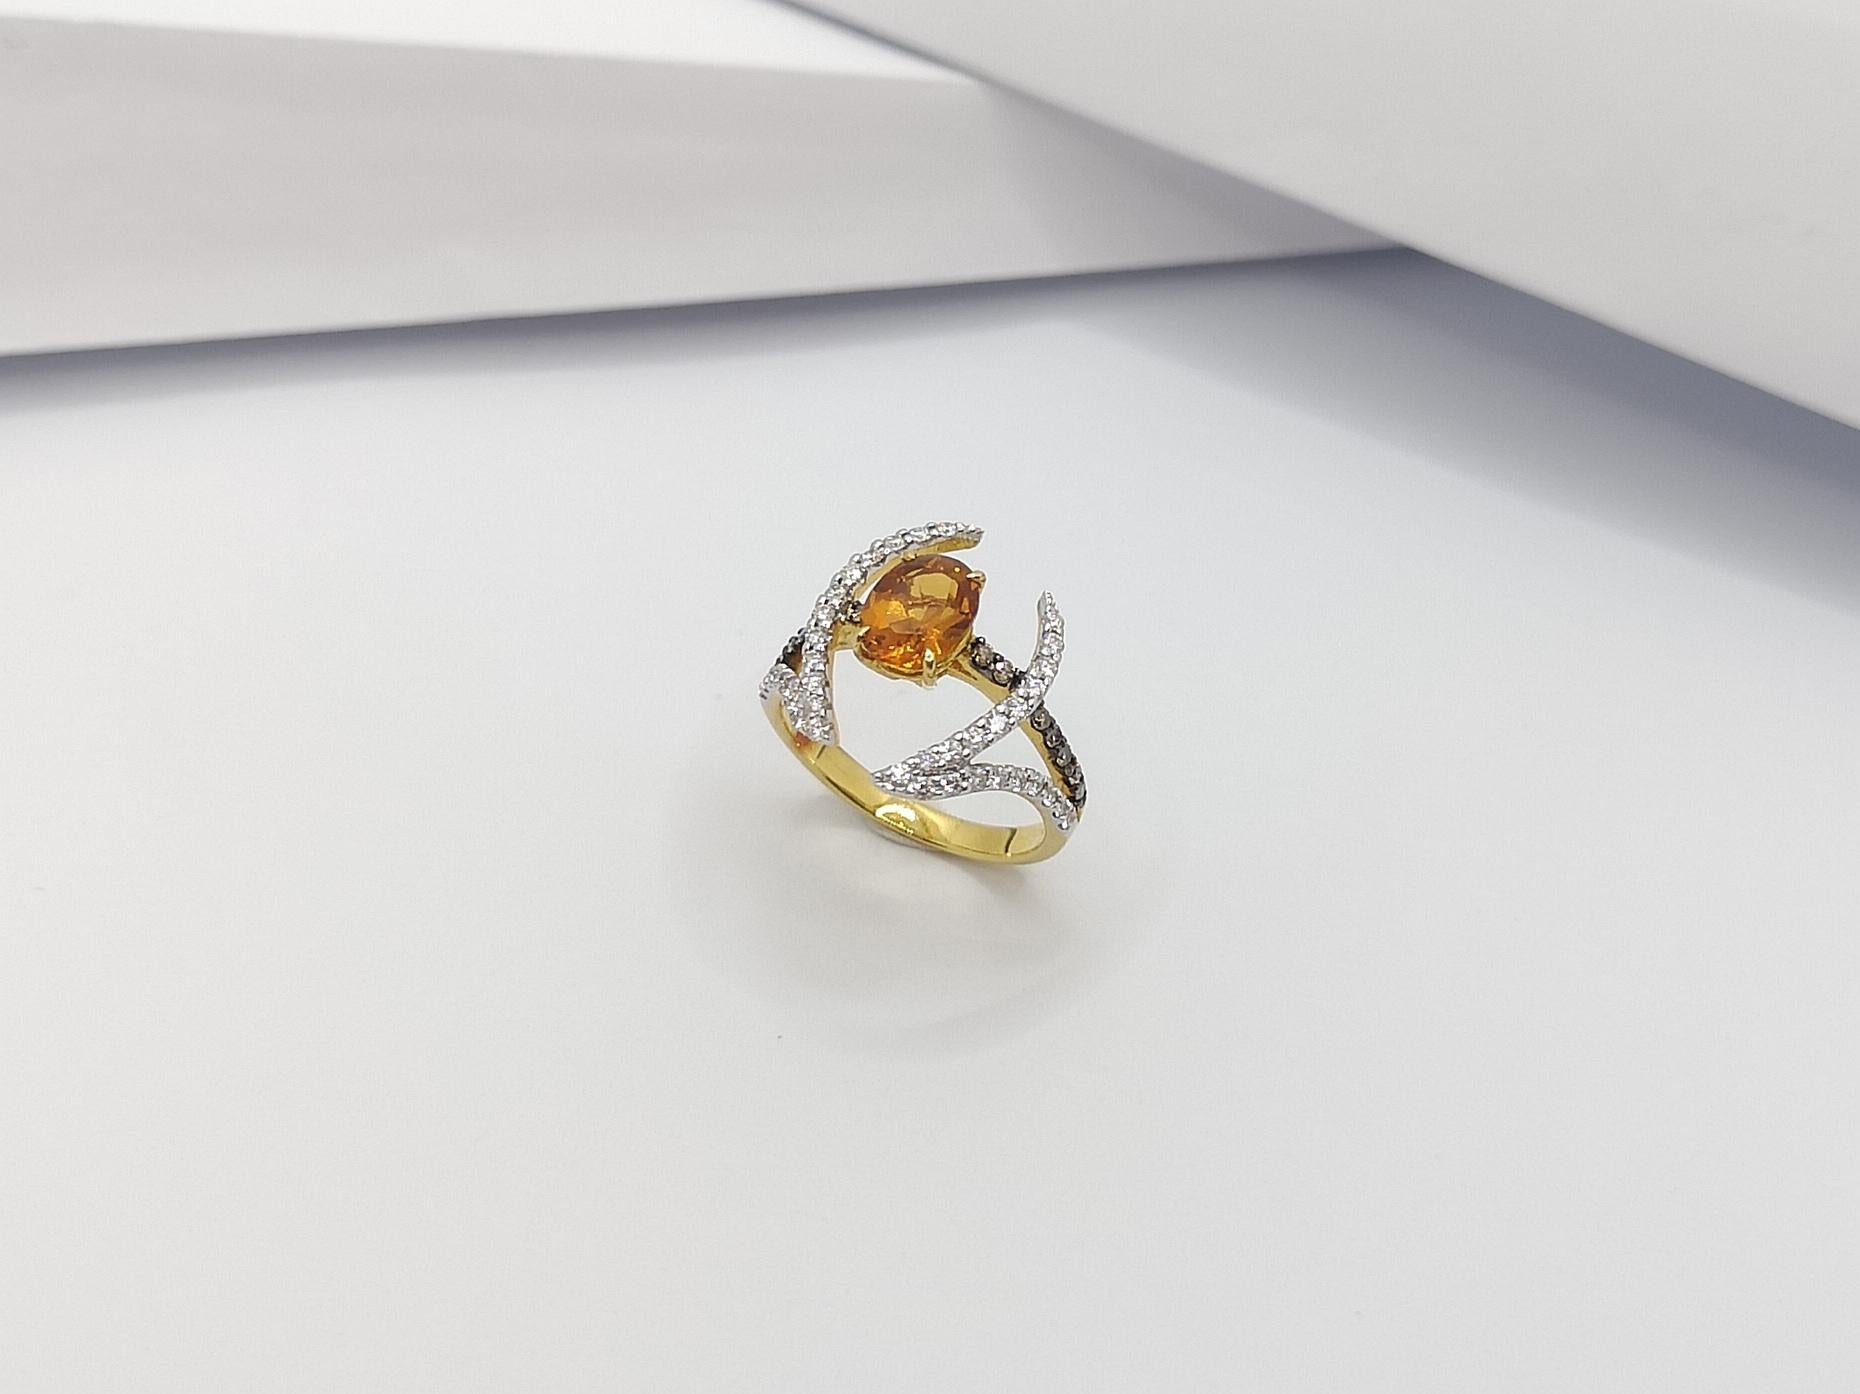 Citrine, Brown Diamond and Diamond Ring Set in 18k Gold by Kavant & Sharart 10